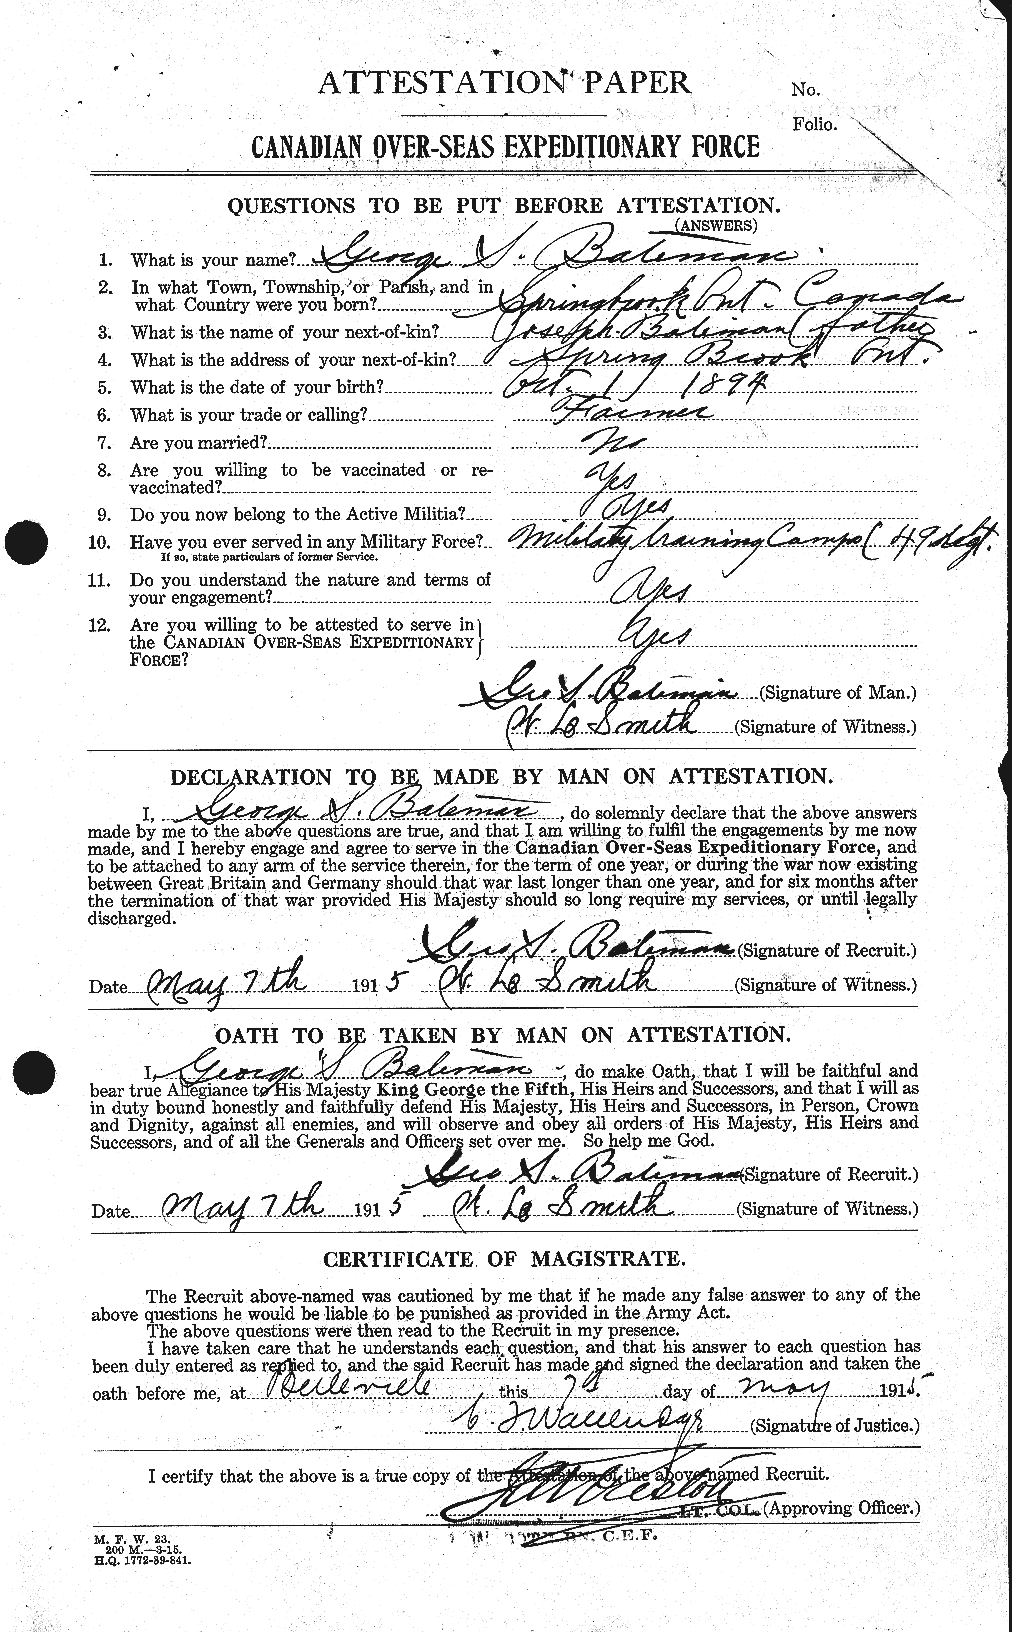 Personnel Records of the First World War - CEF 228029a